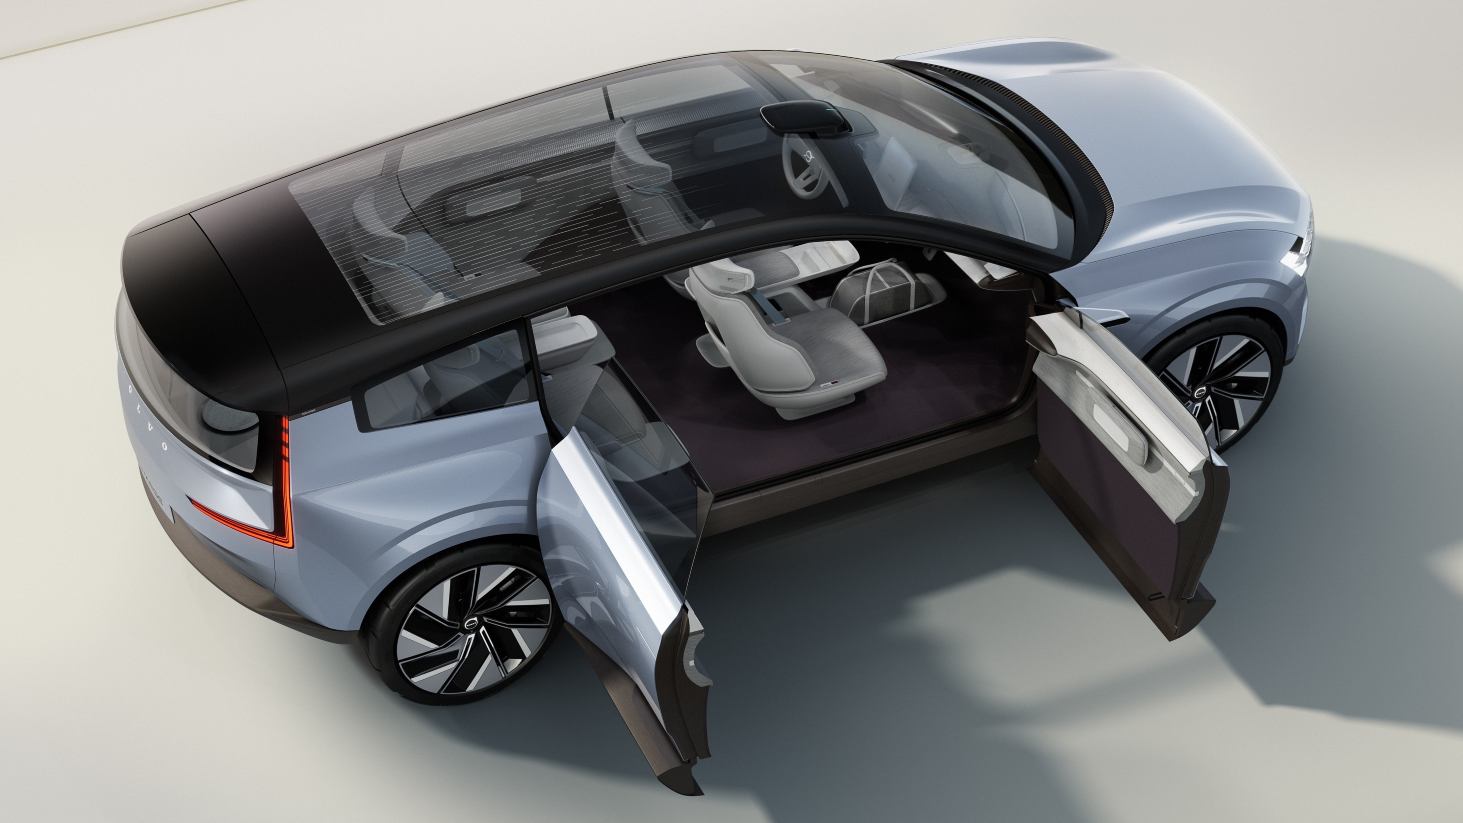 The Concept Recharge features rear-hinged rear doors. Image: Volvo